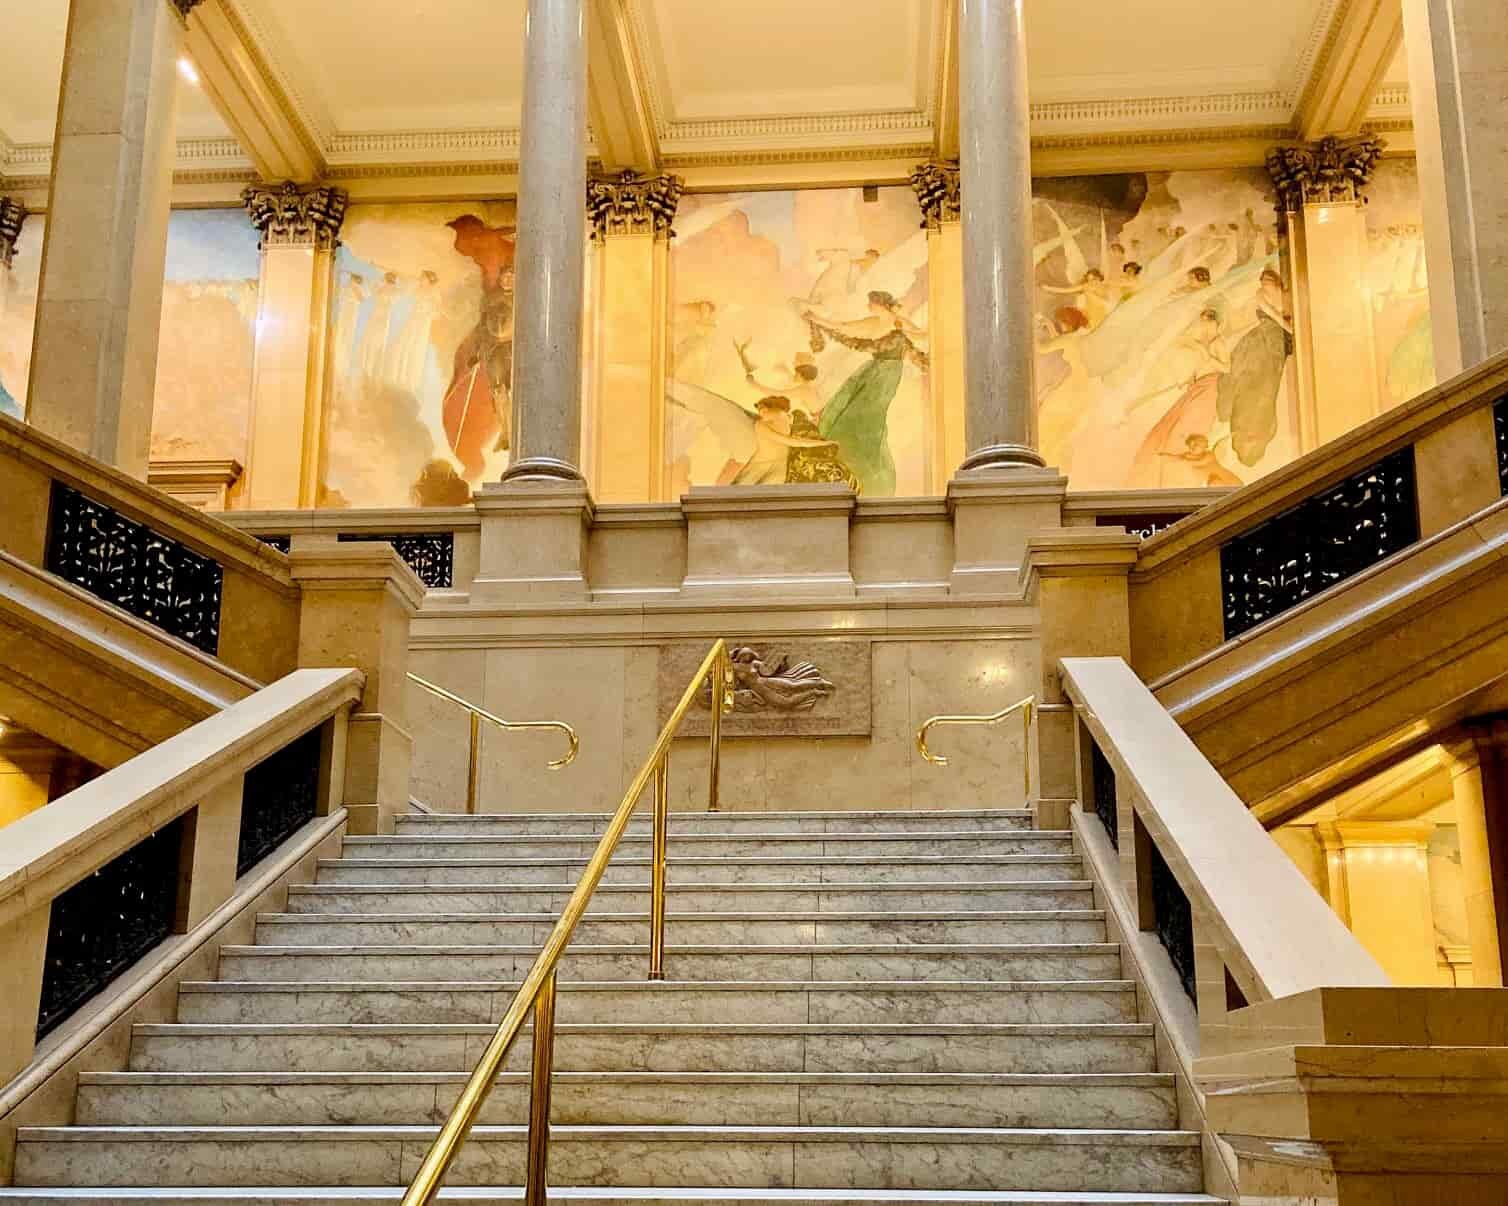  The Crowning of Labor mural covers three floors around the Grand Staircase built in 1907. 